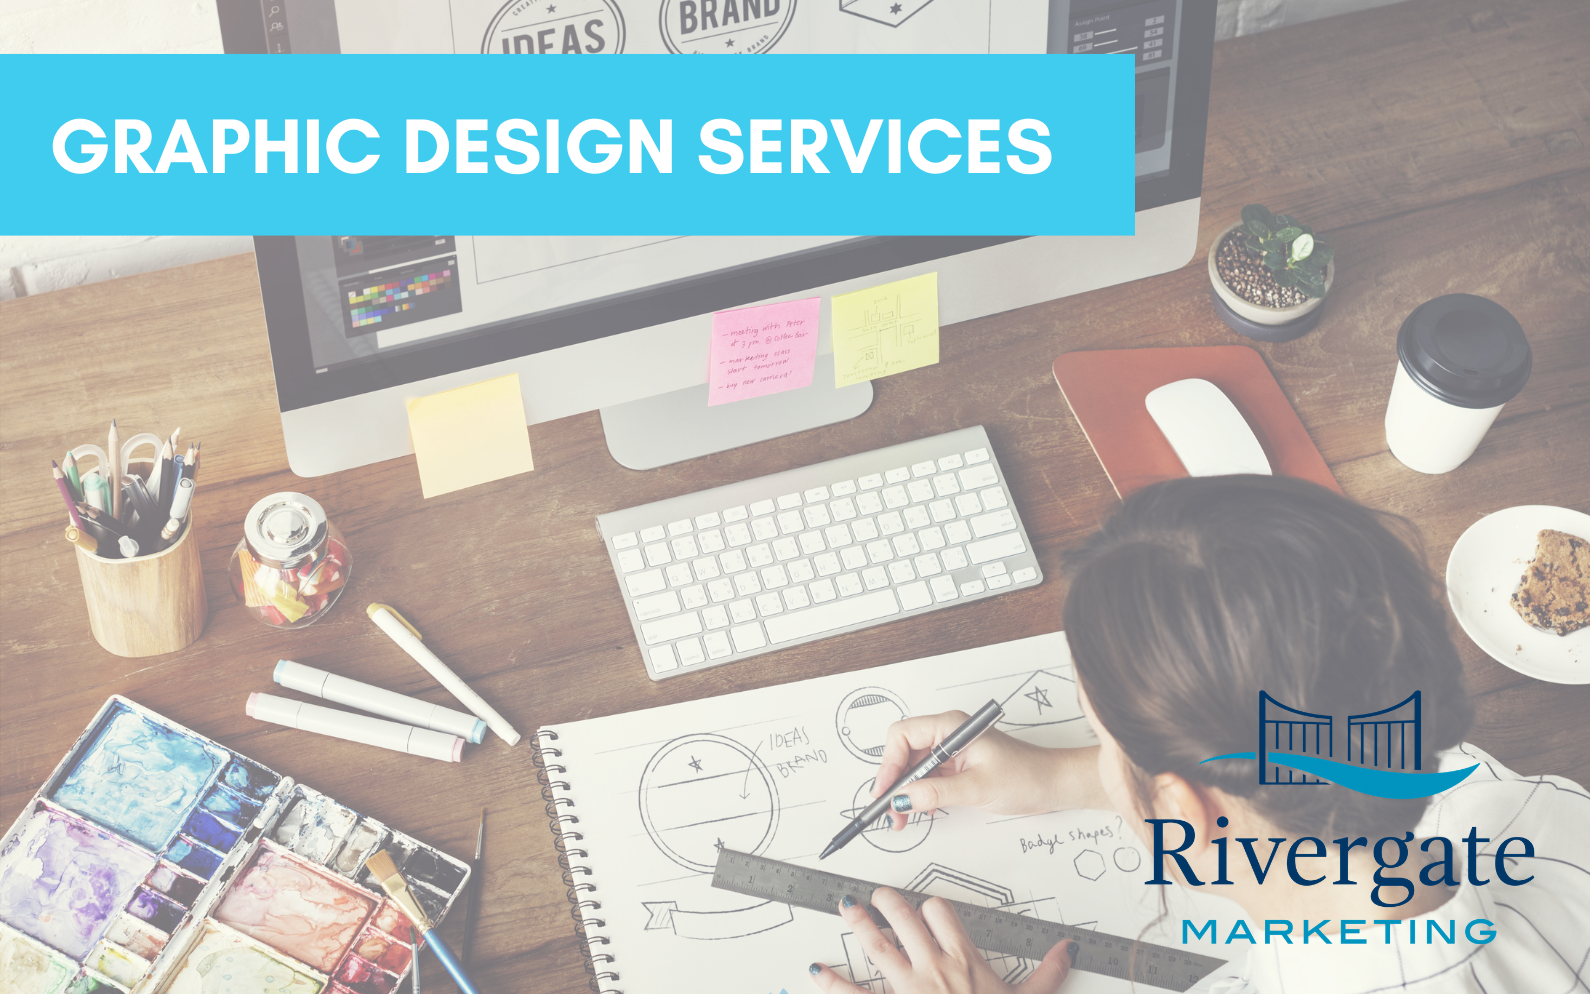 Rivergate marketing Graphic design services for engineers and system integrators